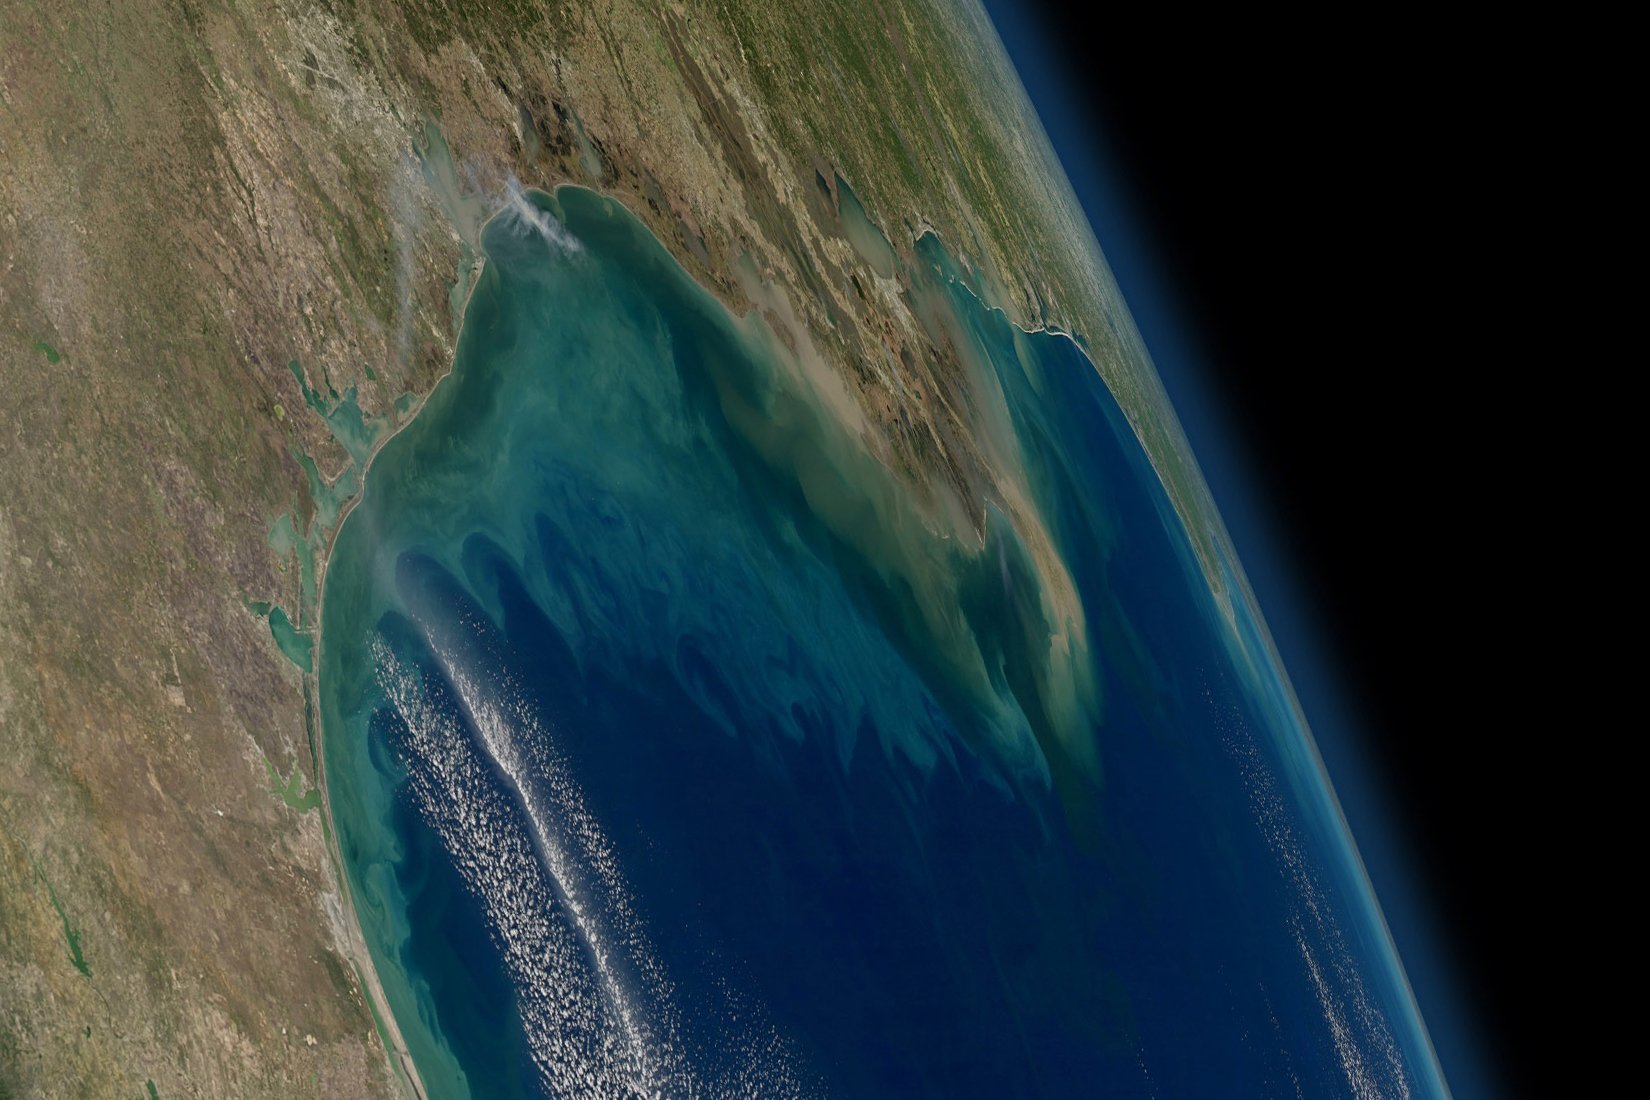 nutrient-rich runoff from the Mississippi and Atchafalaya rivers as seen from the International Space Station